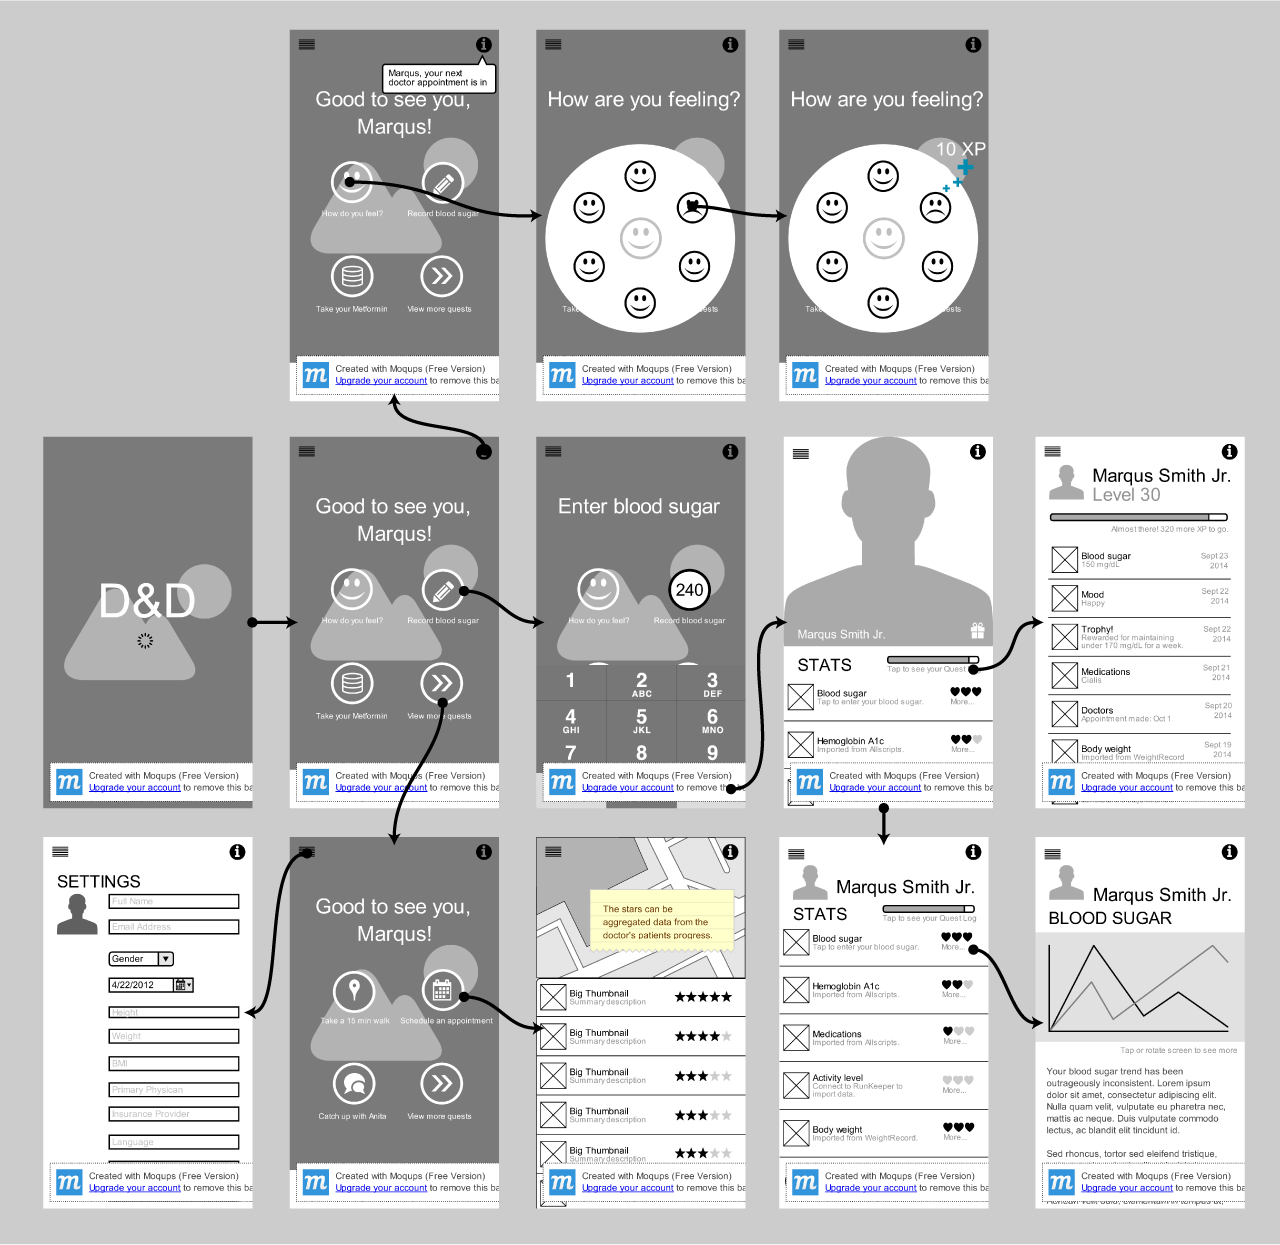 Wireframes for the mobile app design